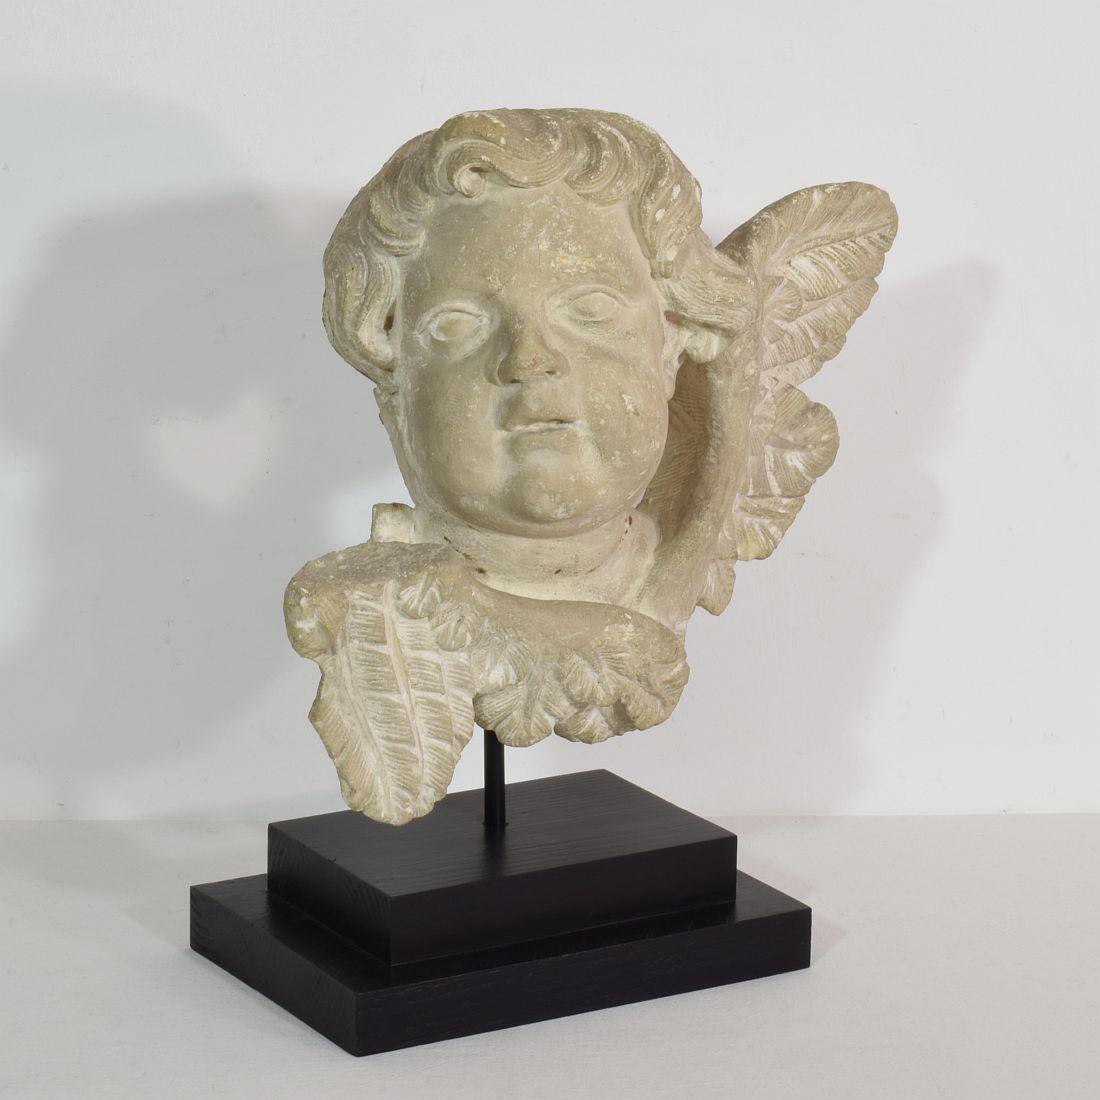 Great and unique find. Hand carved limestone baroque angelhead
Italy, circa 1650-1750.
Weathered and small losses.
Measurement includes the wooden base.